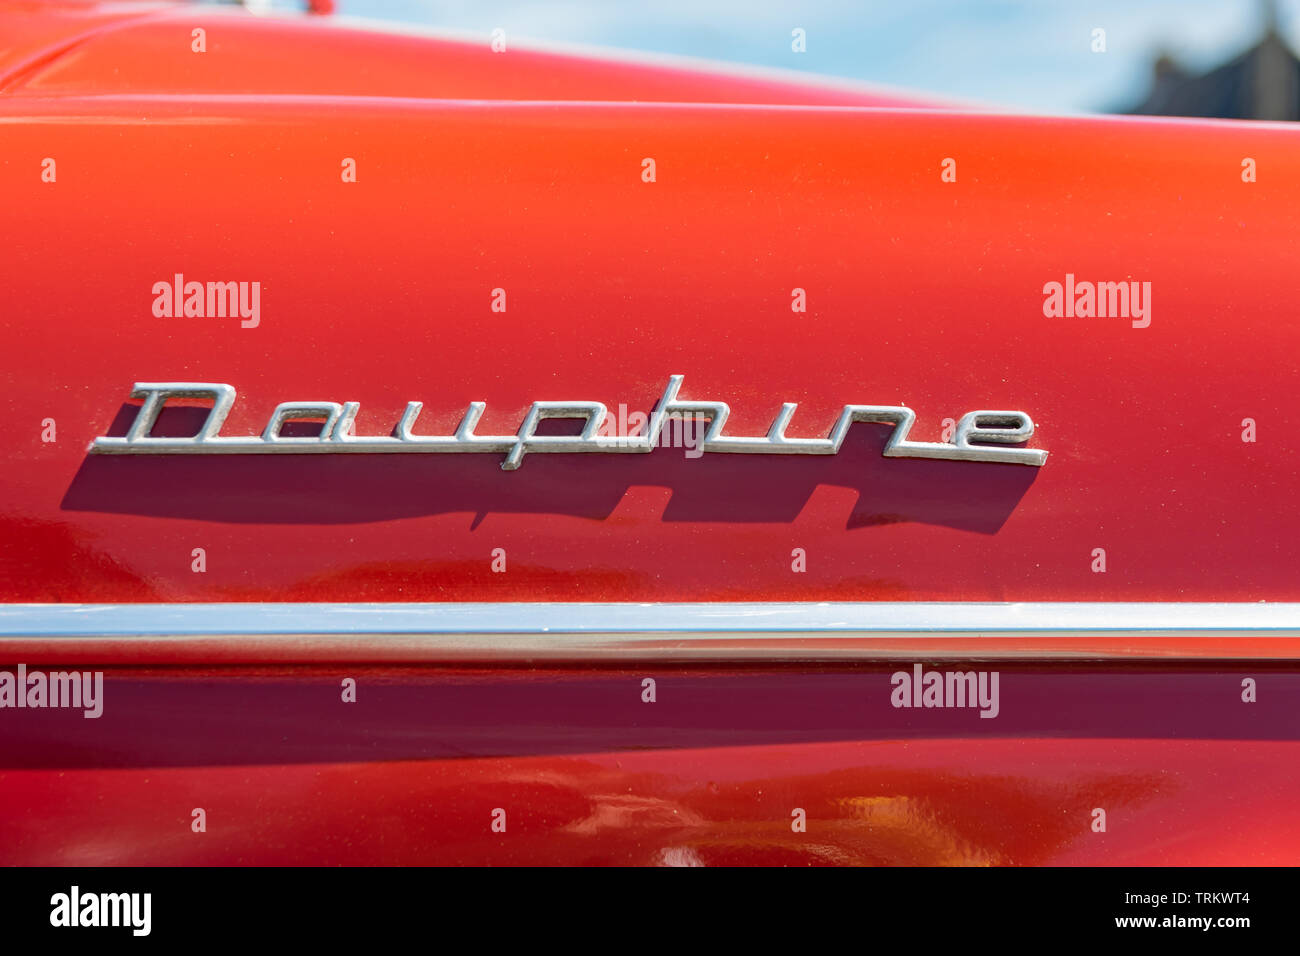 Wattrelos,FRANCE-June 02,2019: view of the Renault Dauphine brand and logo. Stock Photo